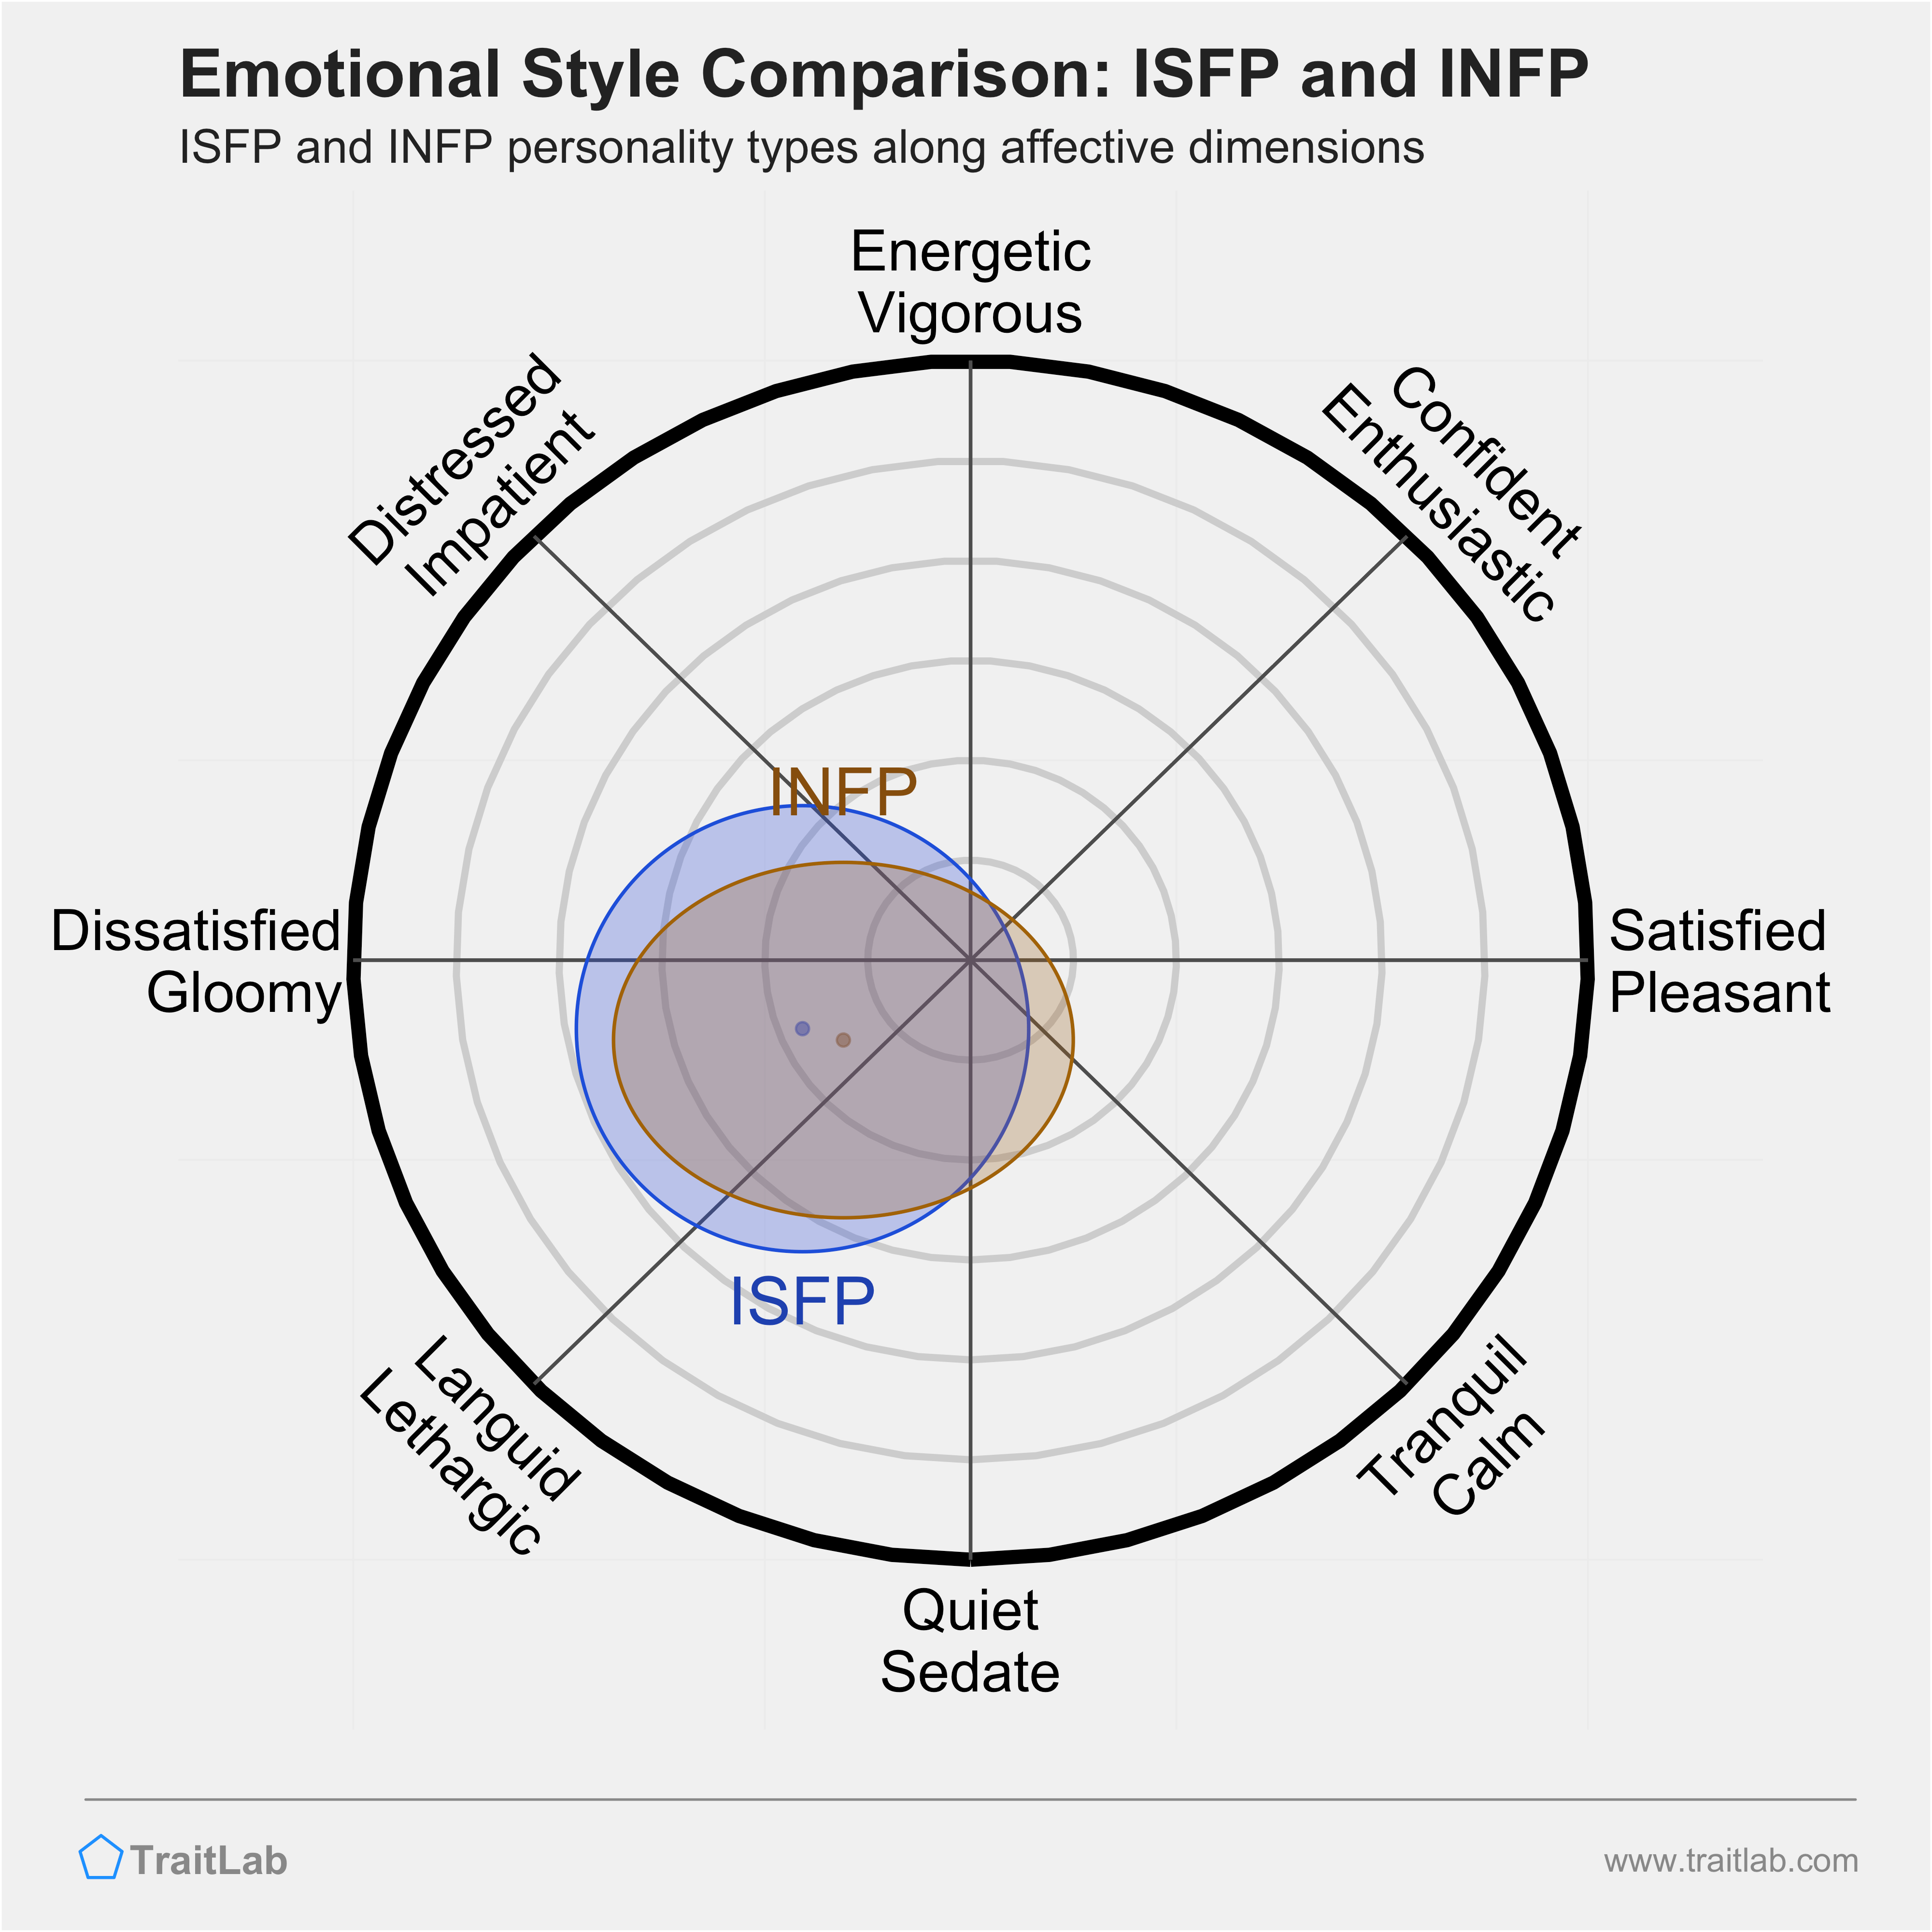 ISFP and INFP comparison across emotional (affective) dimensions